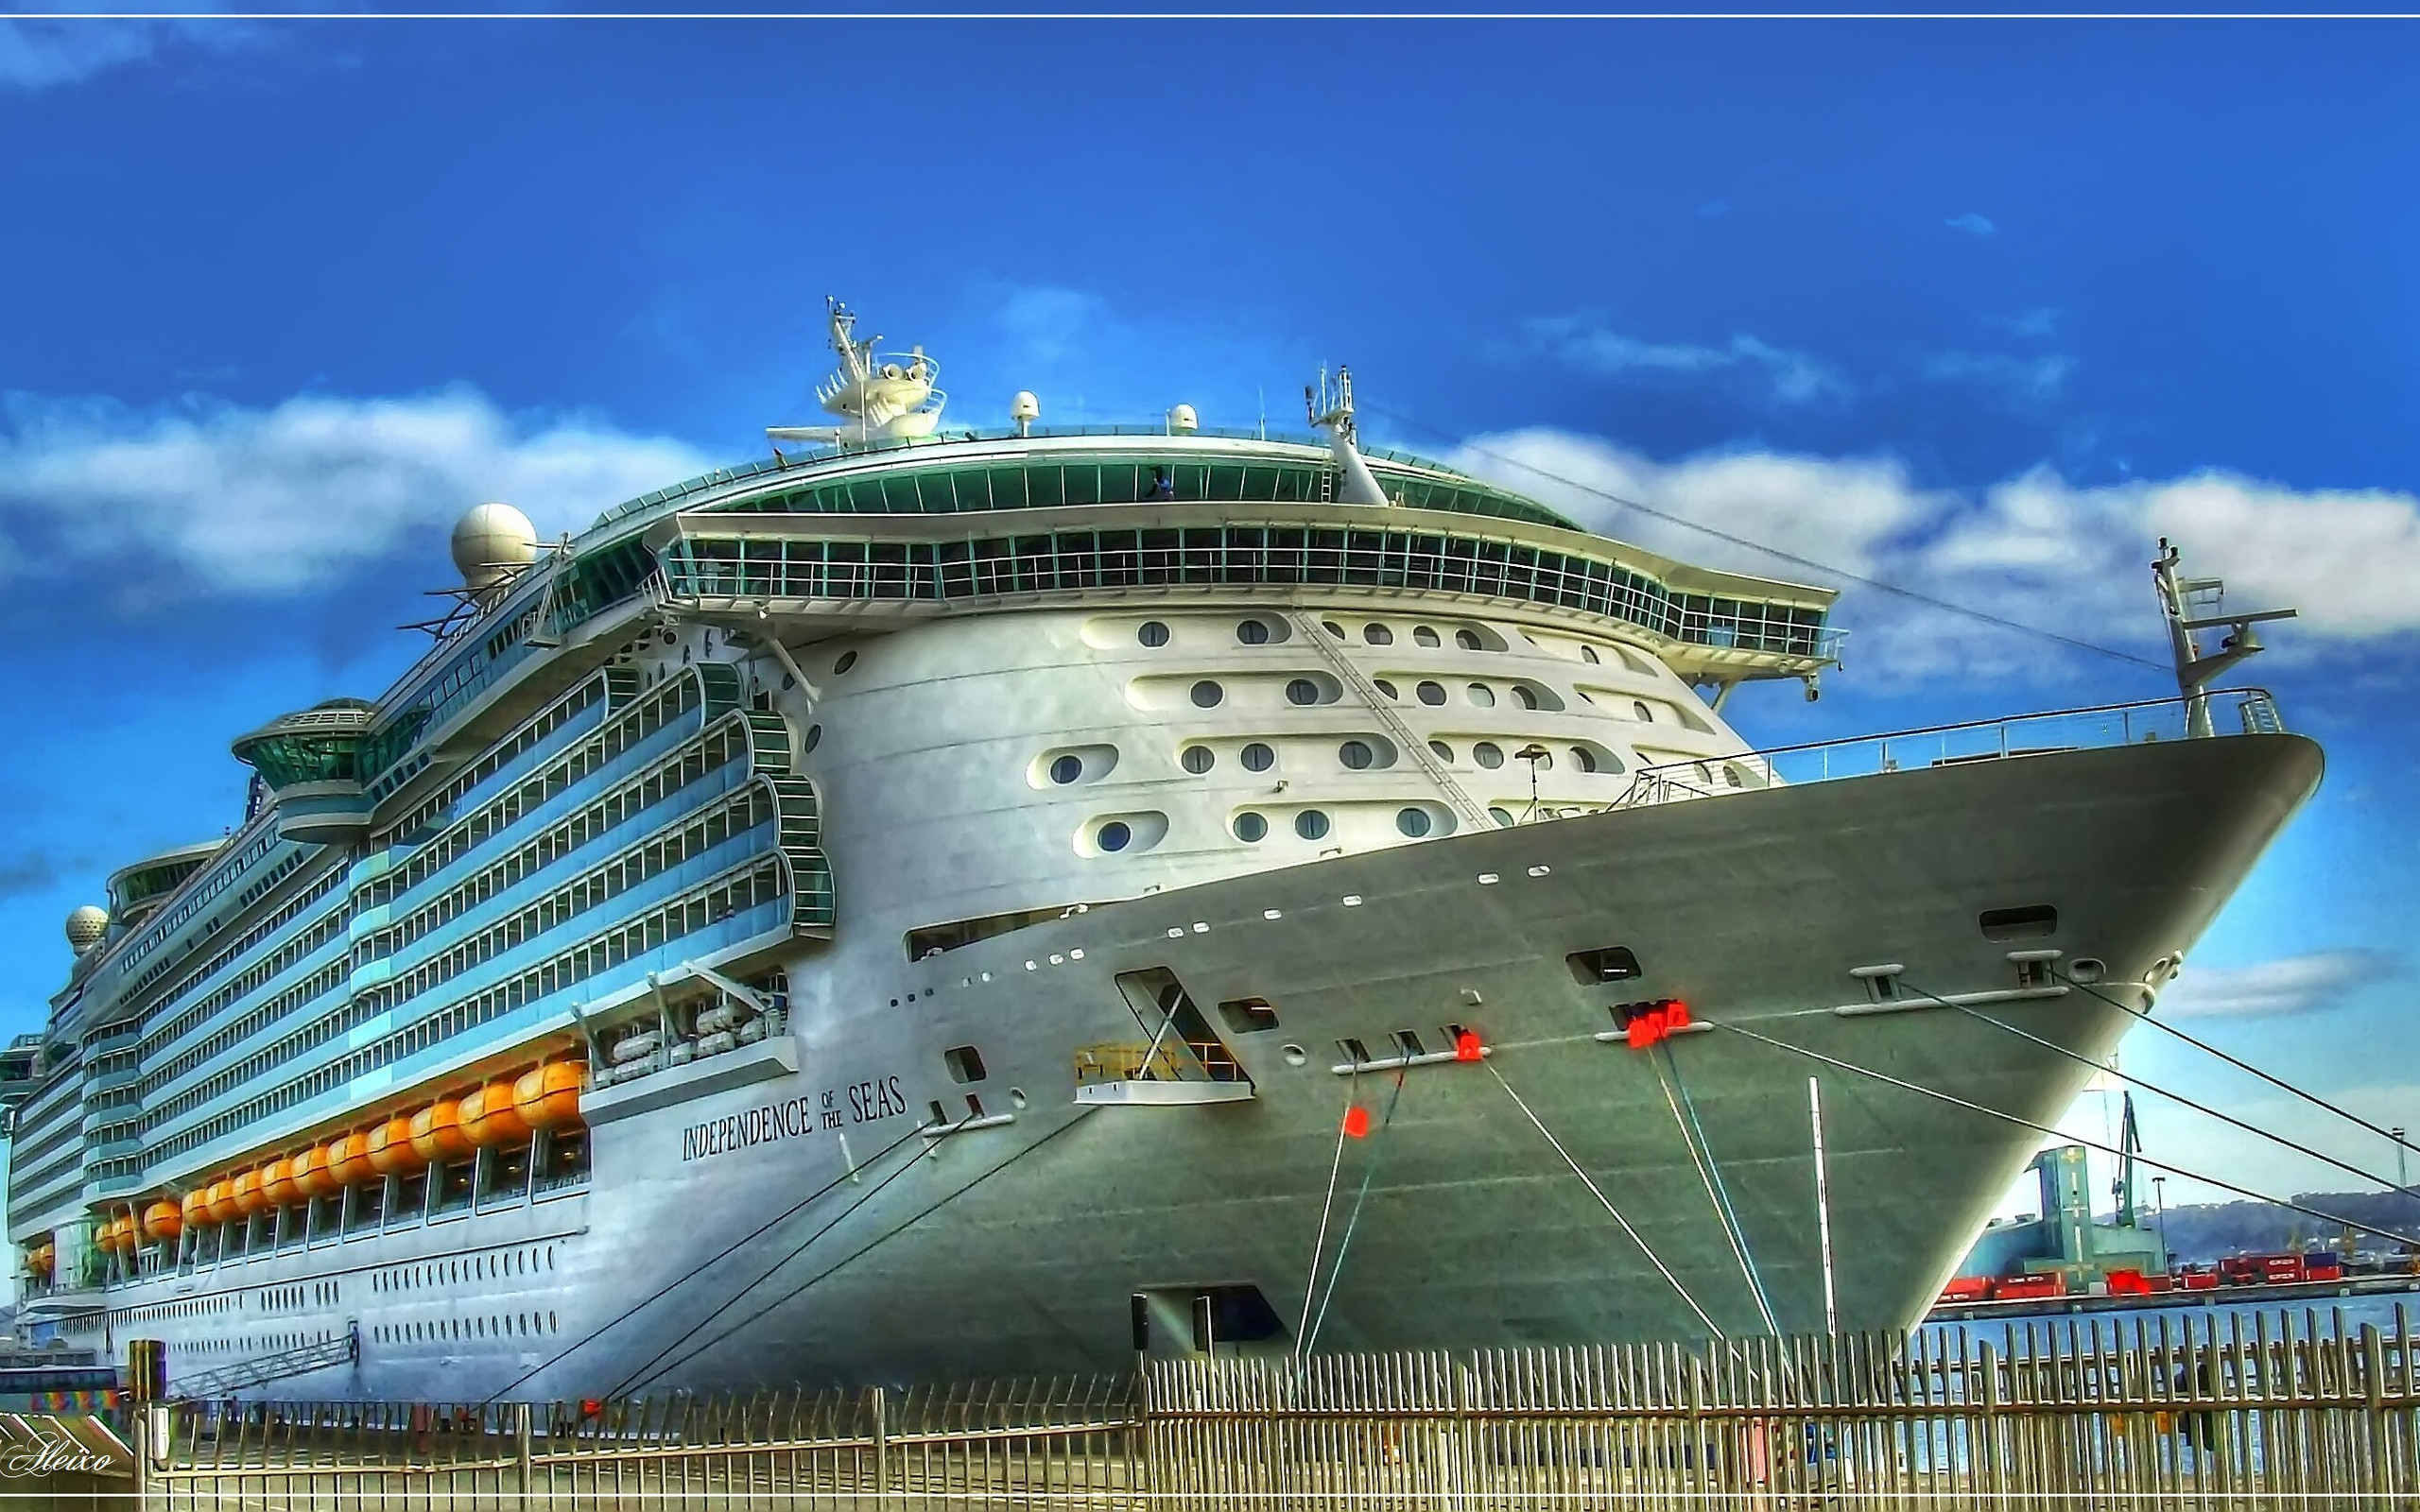 2560x1600 Cruise ships best wallpapers - My Free Wallpapers Hub